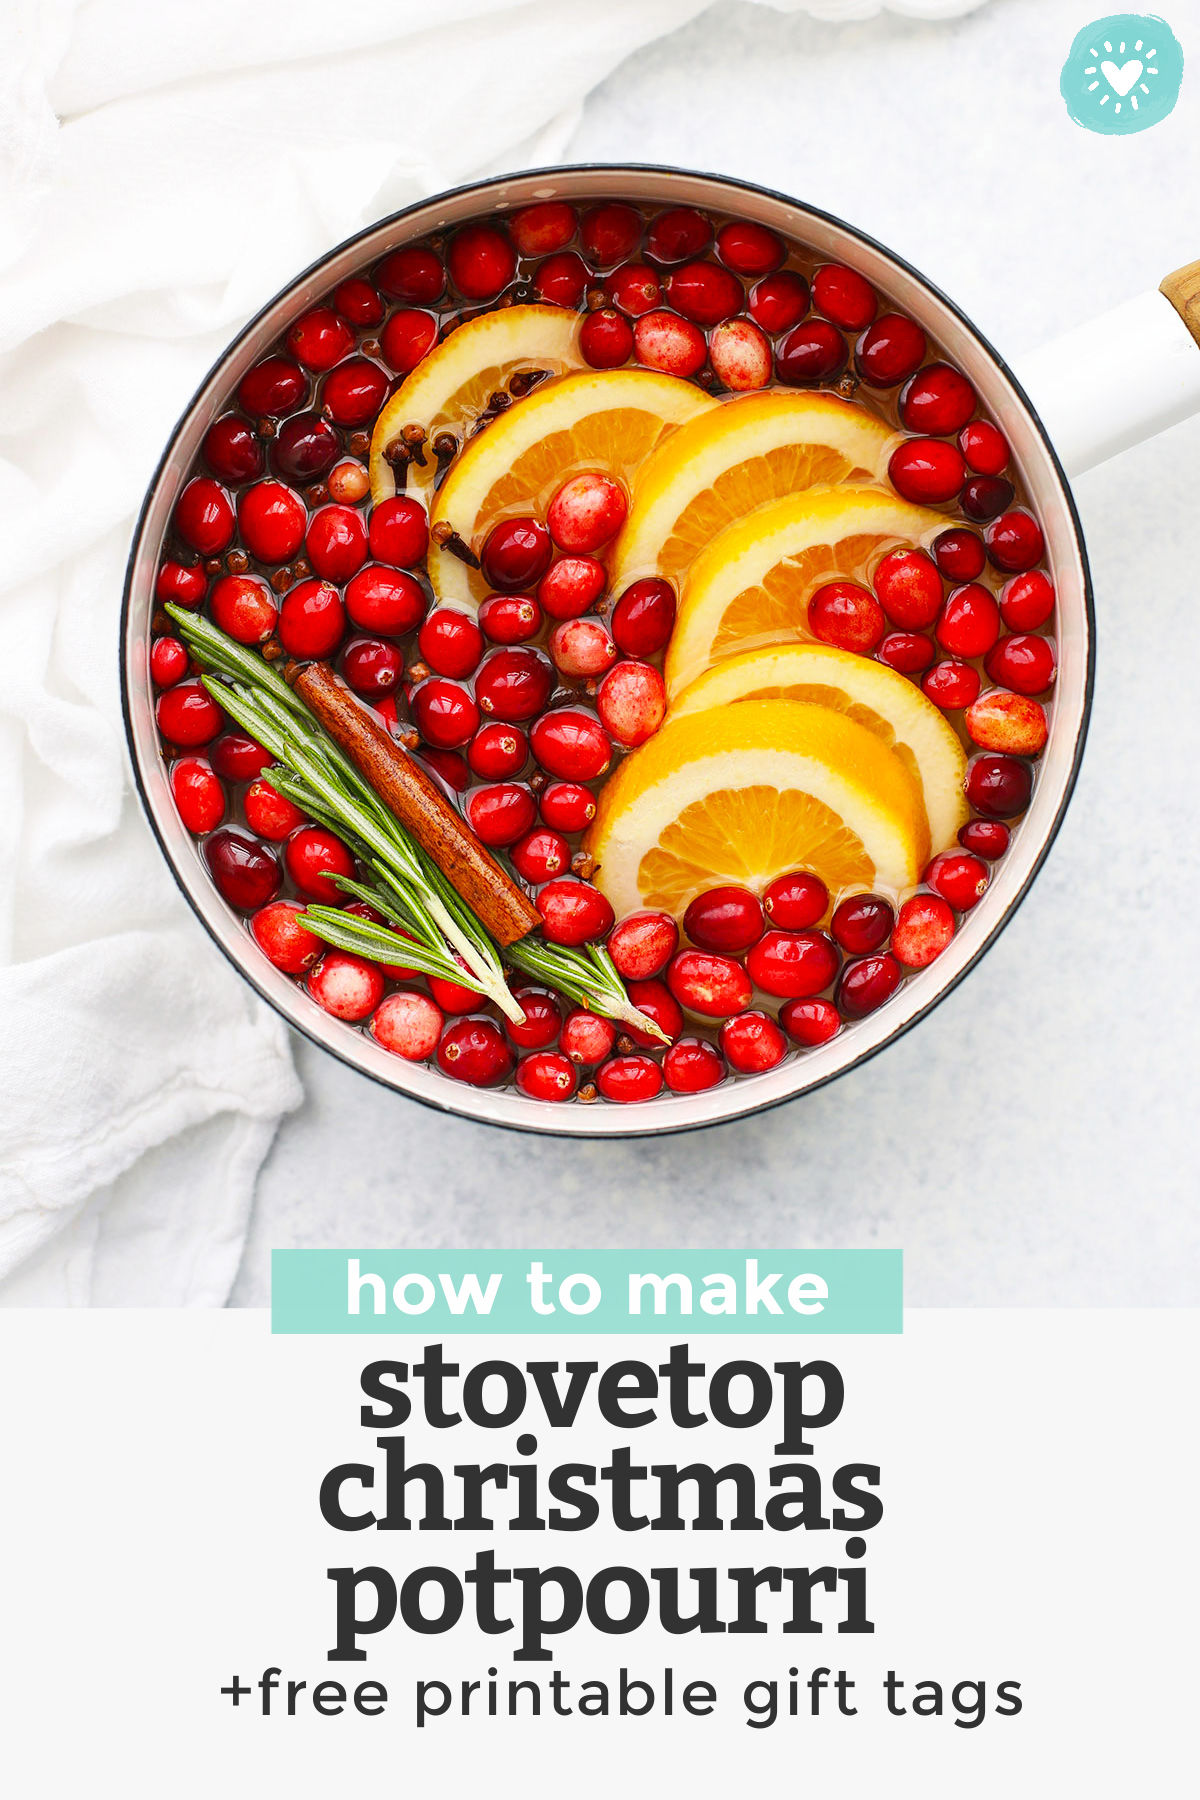 How to Make Stovetop Christmas Potpourri - This holiday potpourri recipe is like bottling up the Christmas smell! It's a great way to make your home smell like the holidays and makes a fantastic gift. Click for a how-to video and FREE PRINTABLE gift tags for gifting! #freeprintable #gifttags #printablegifttags // gift tags // free printable gift tags // free Christmas printable